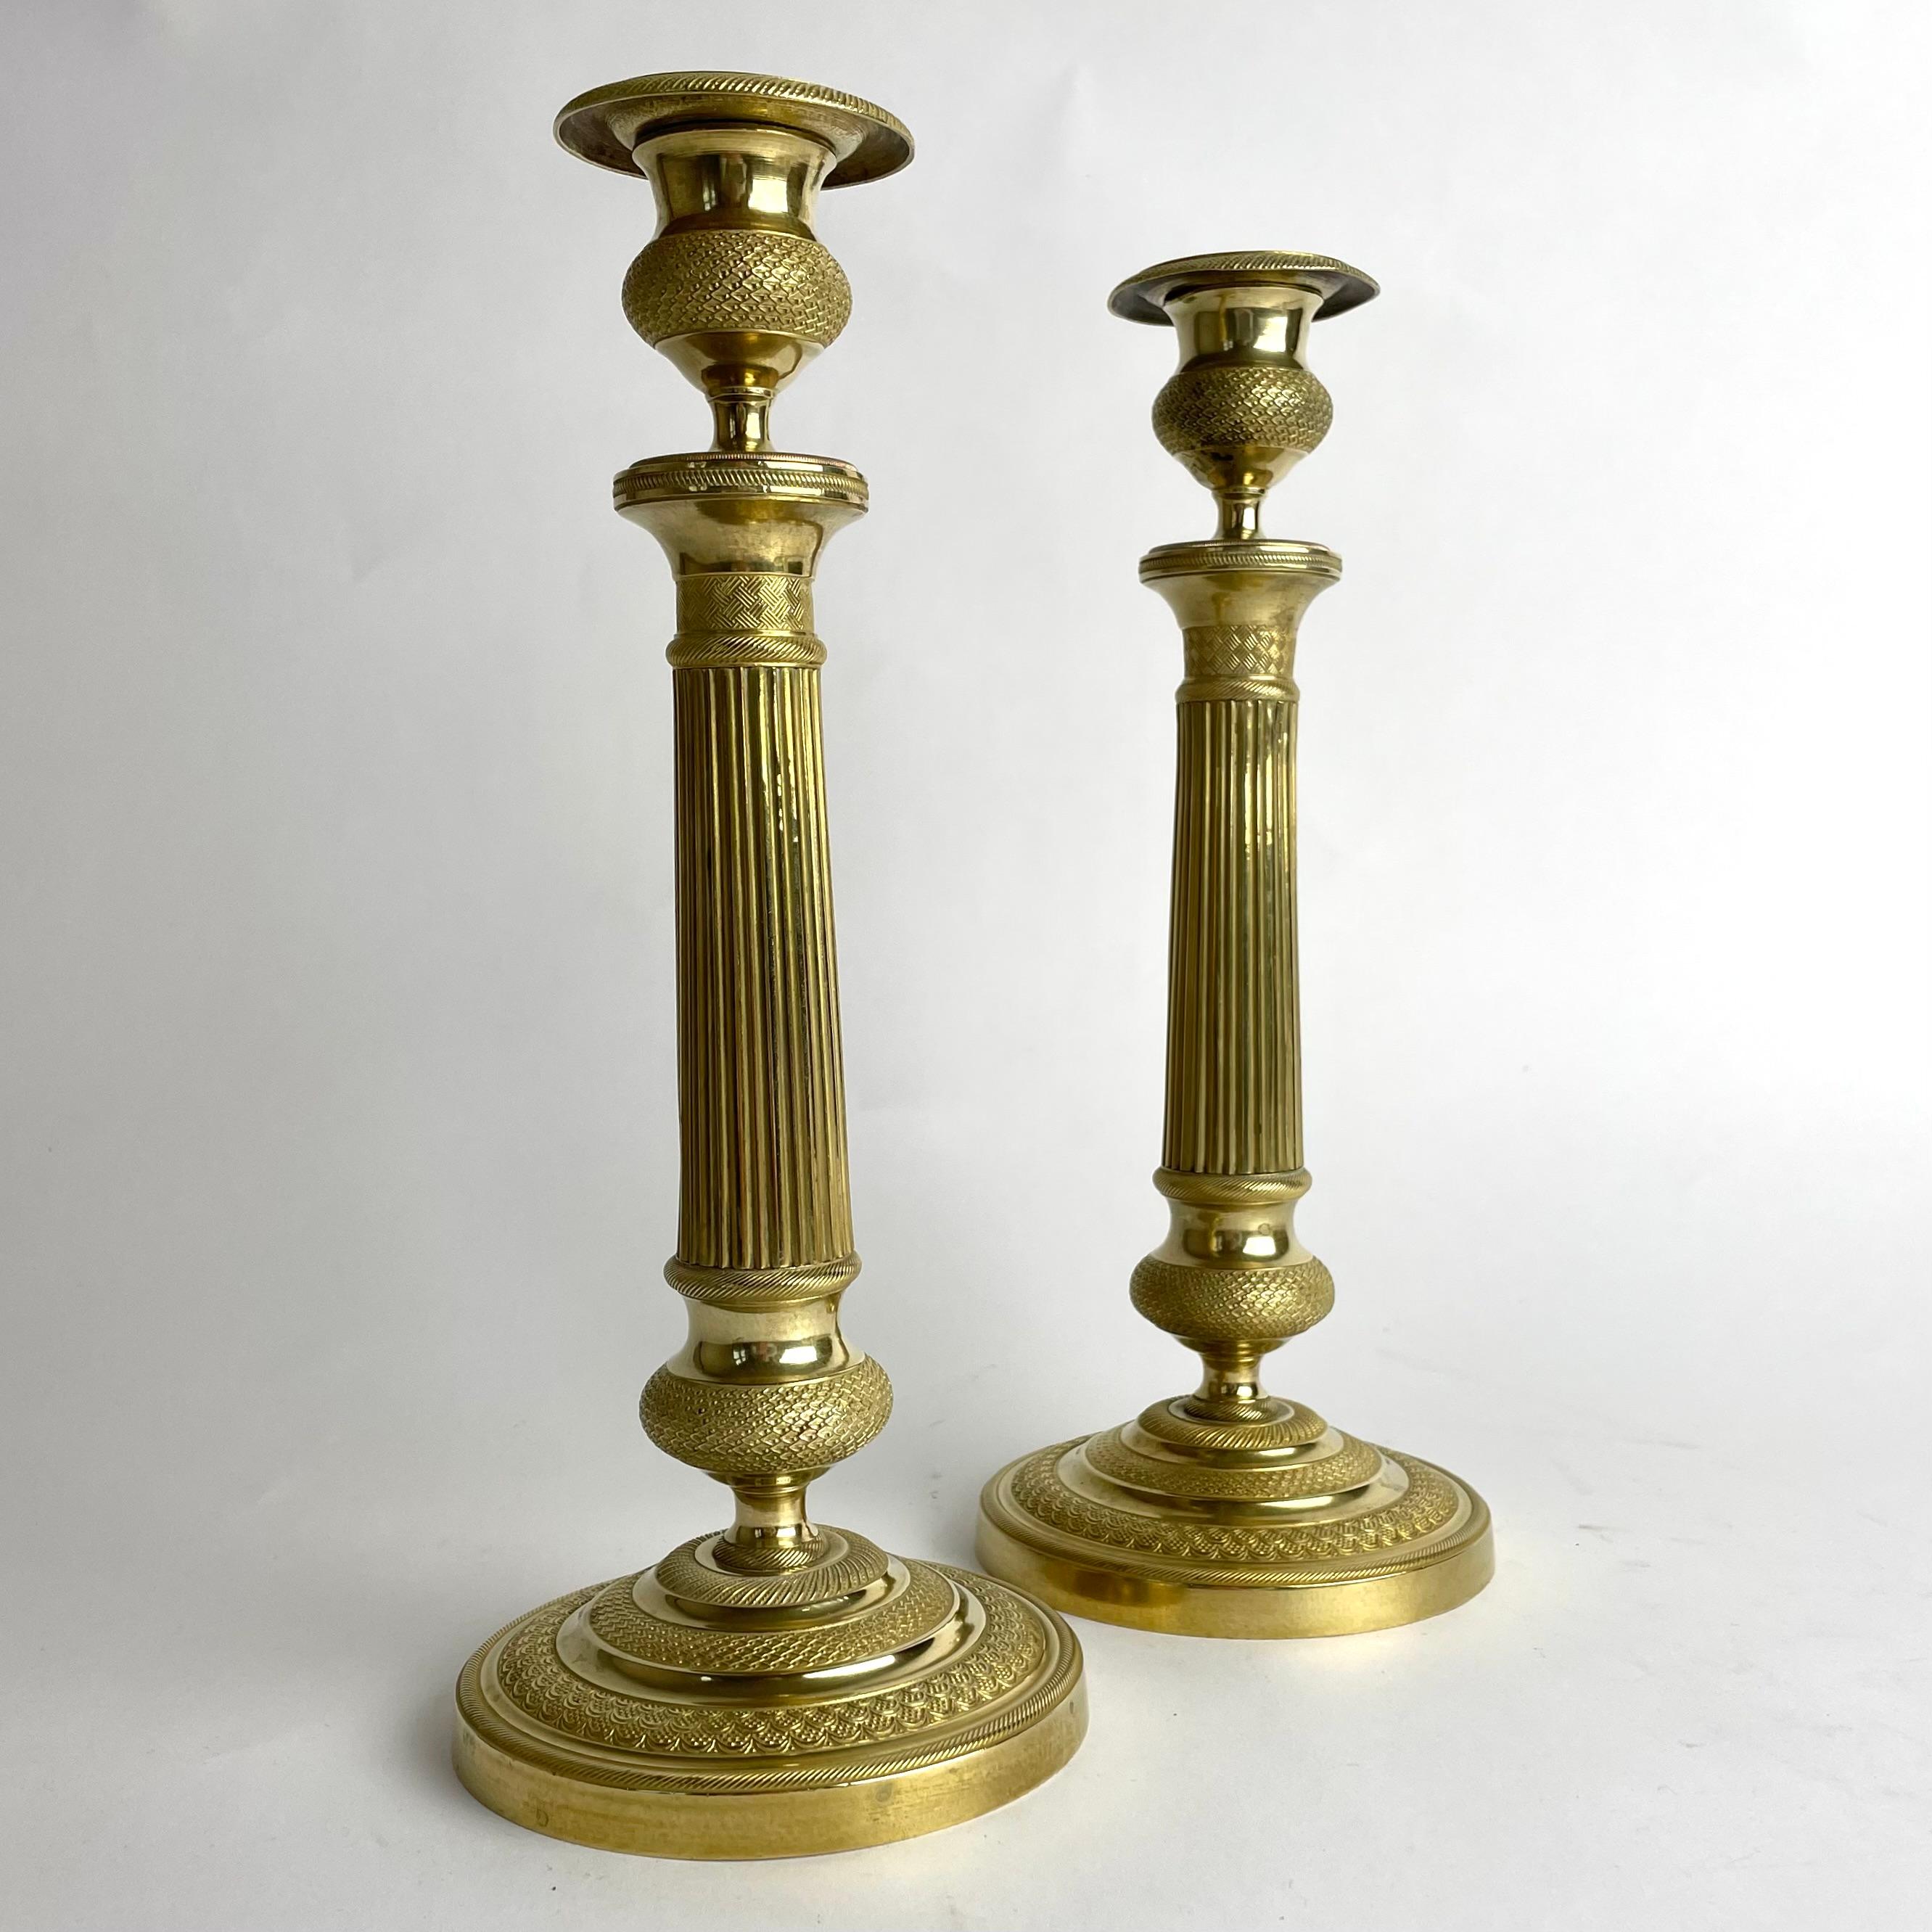 A very Elegant pair of Empire Candlesticks in gilt bronze. Made in France during the 1820s. Richly decorated in period design.


Wear consistent with age and use 